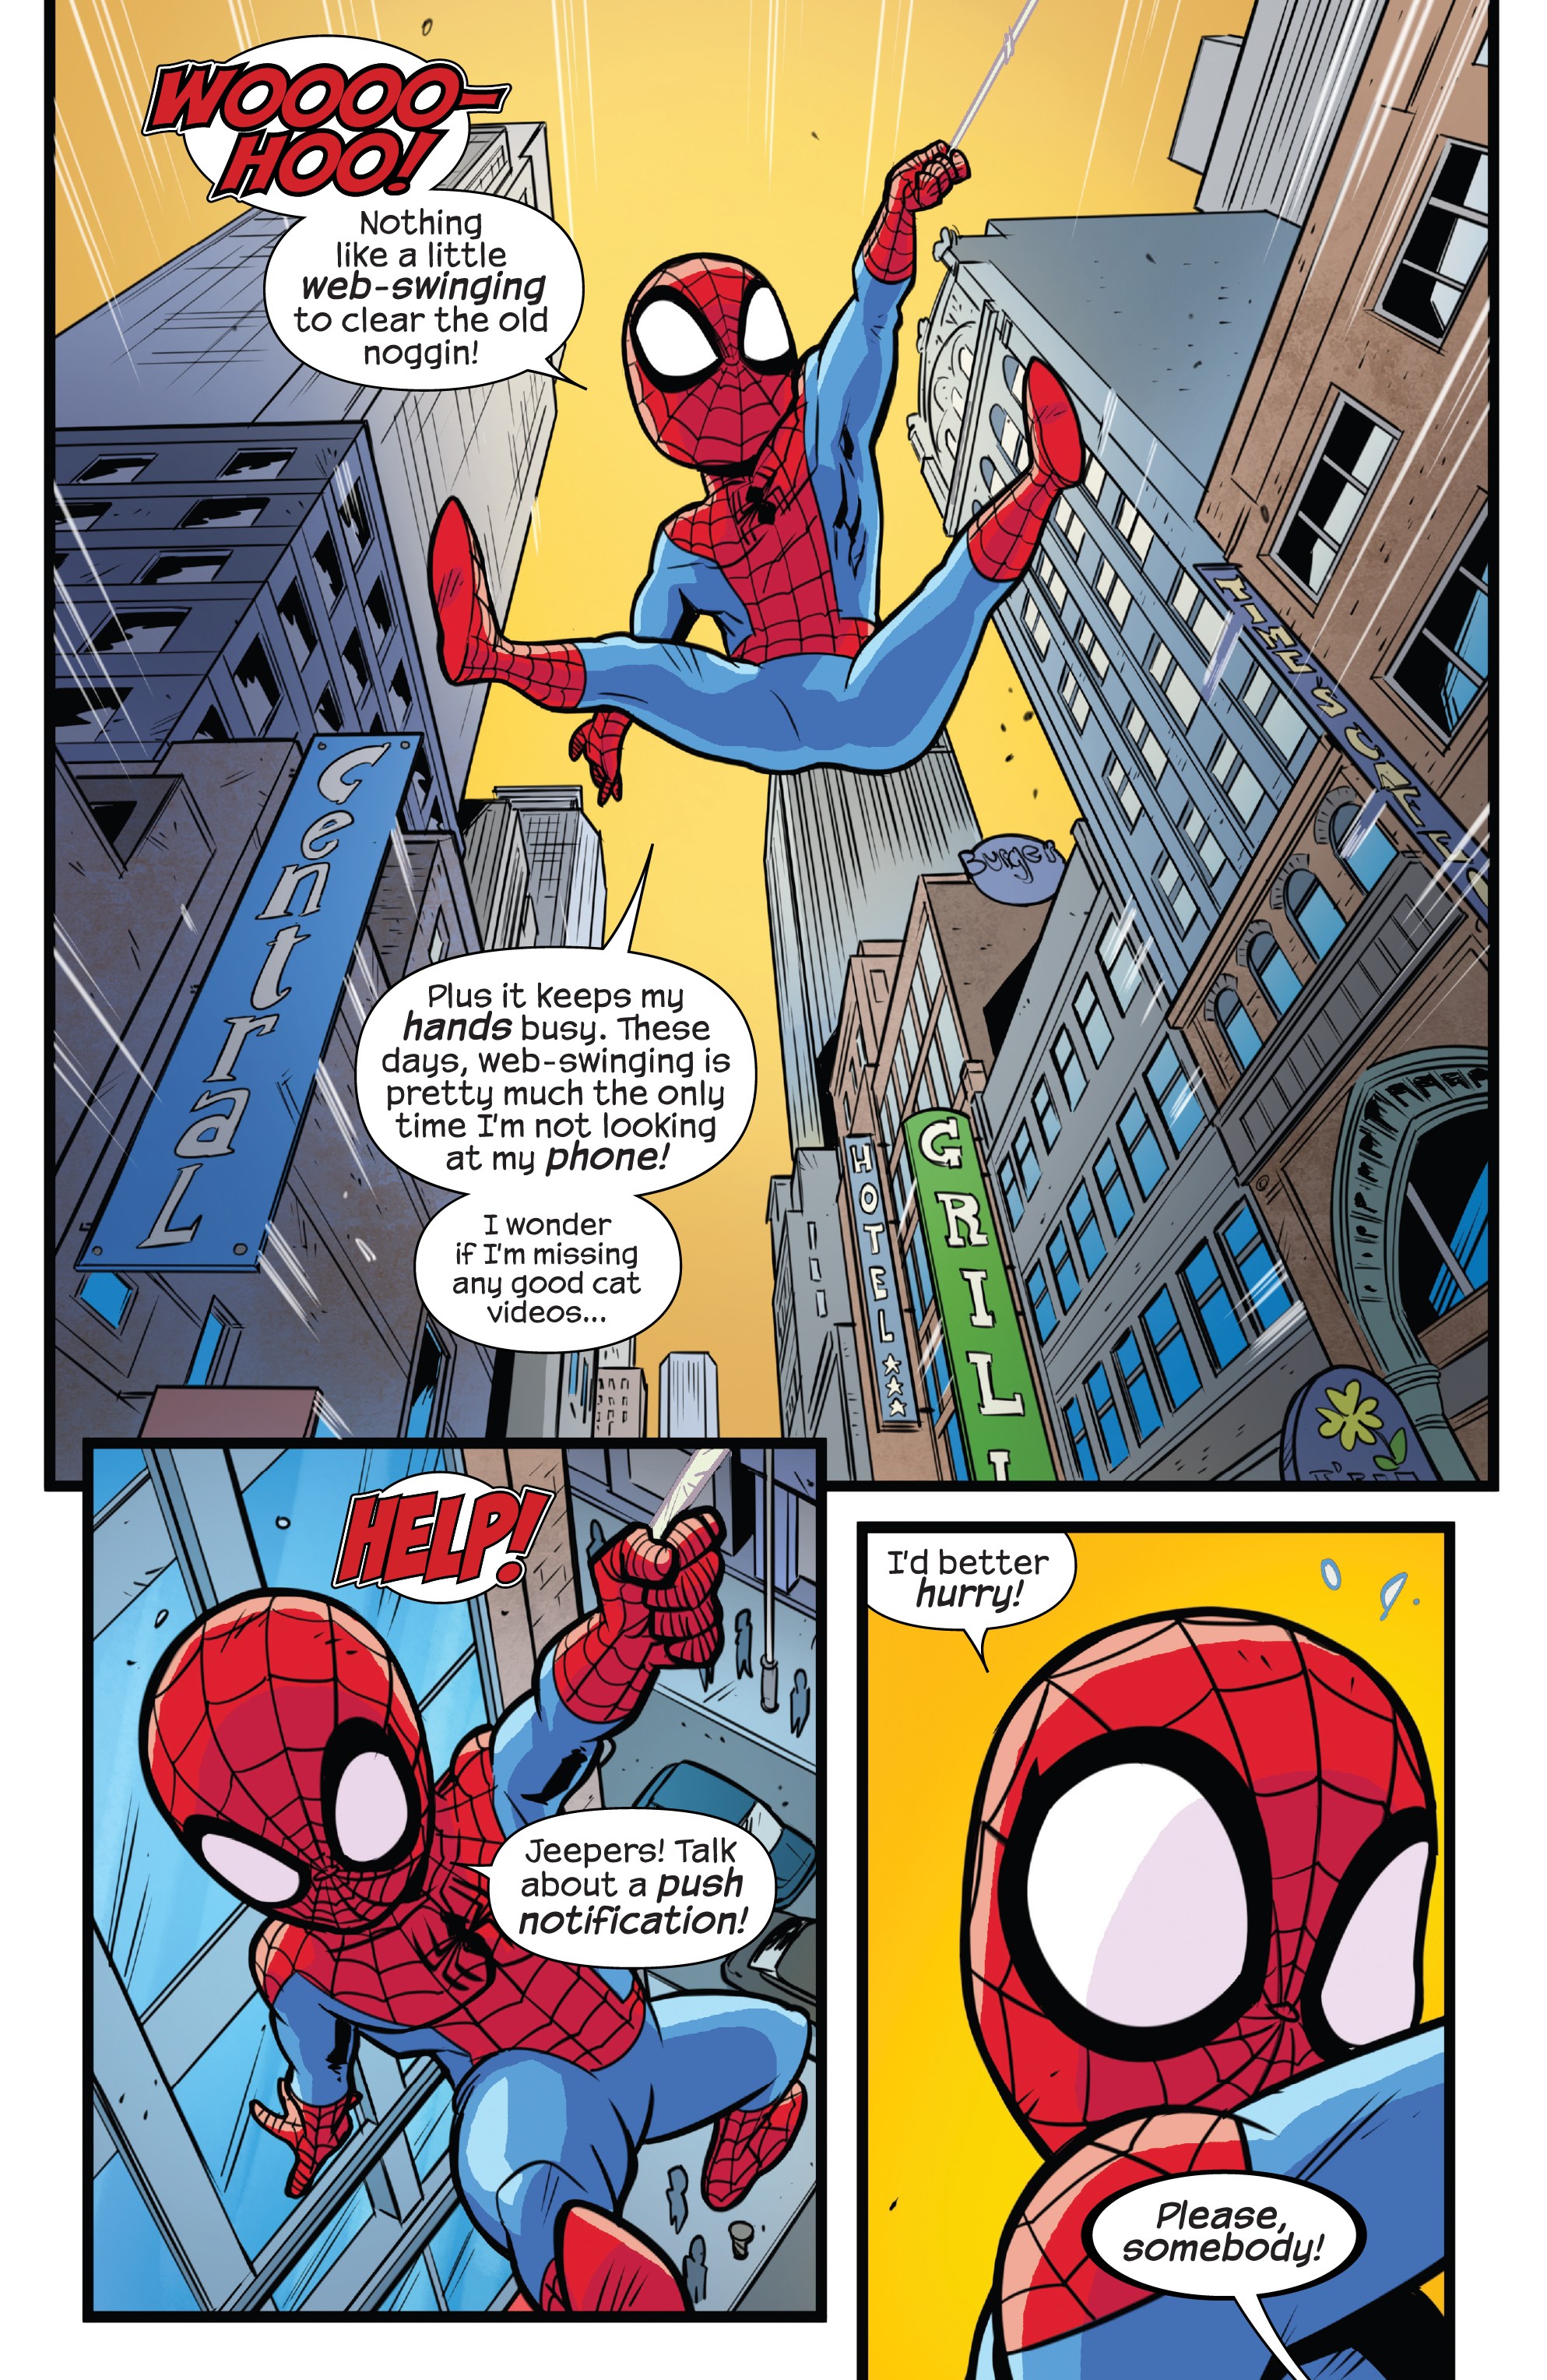 The Old Adventures Of New 'Spider-Man